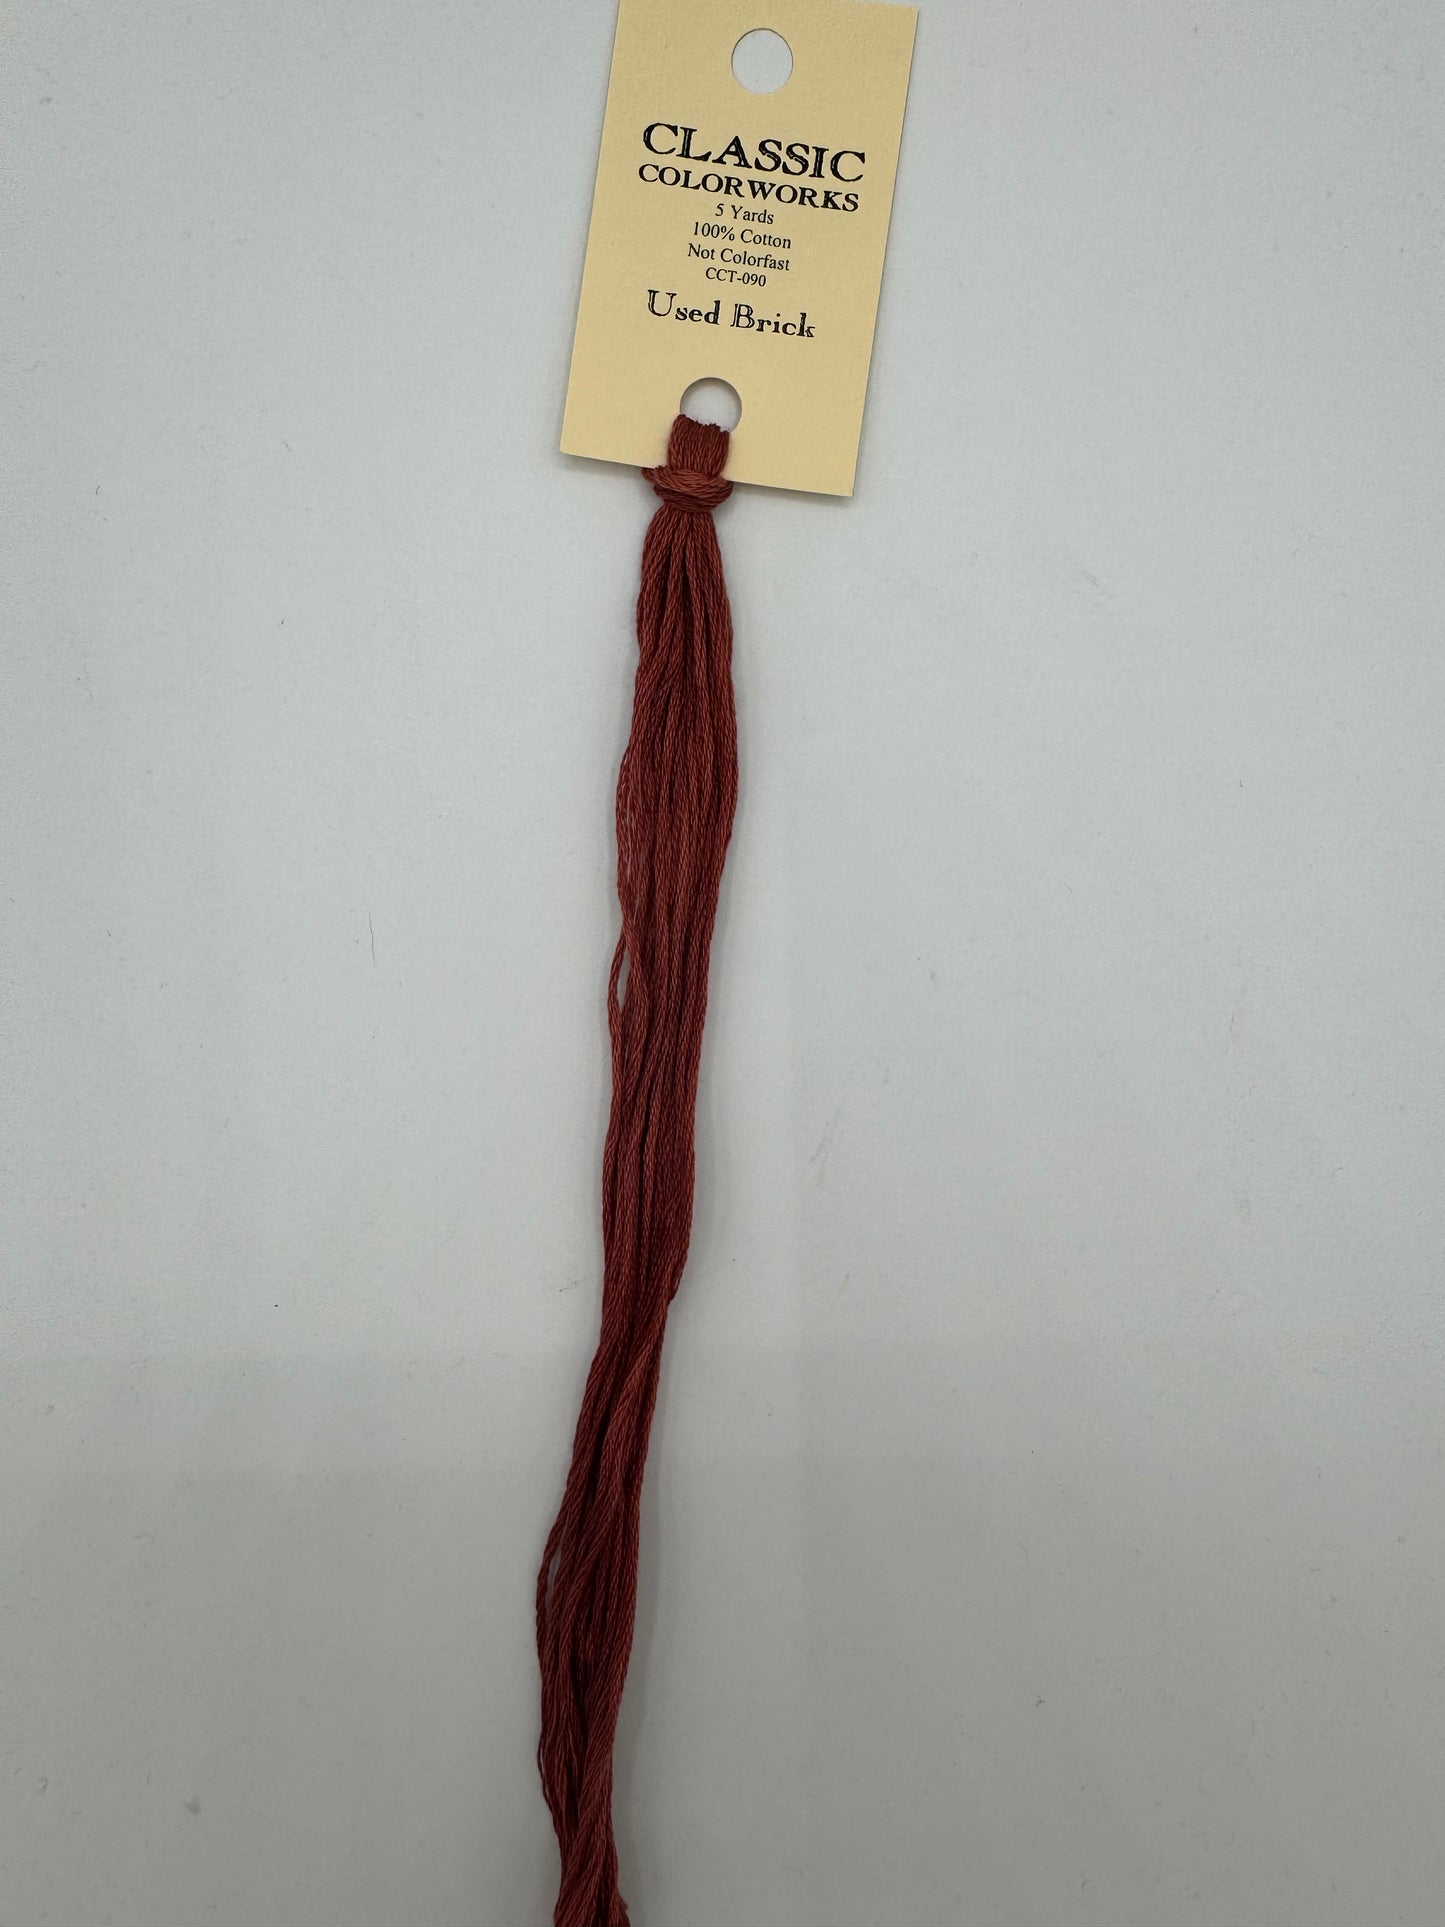 Used Brick - Classic Colorworks Cotton Floss